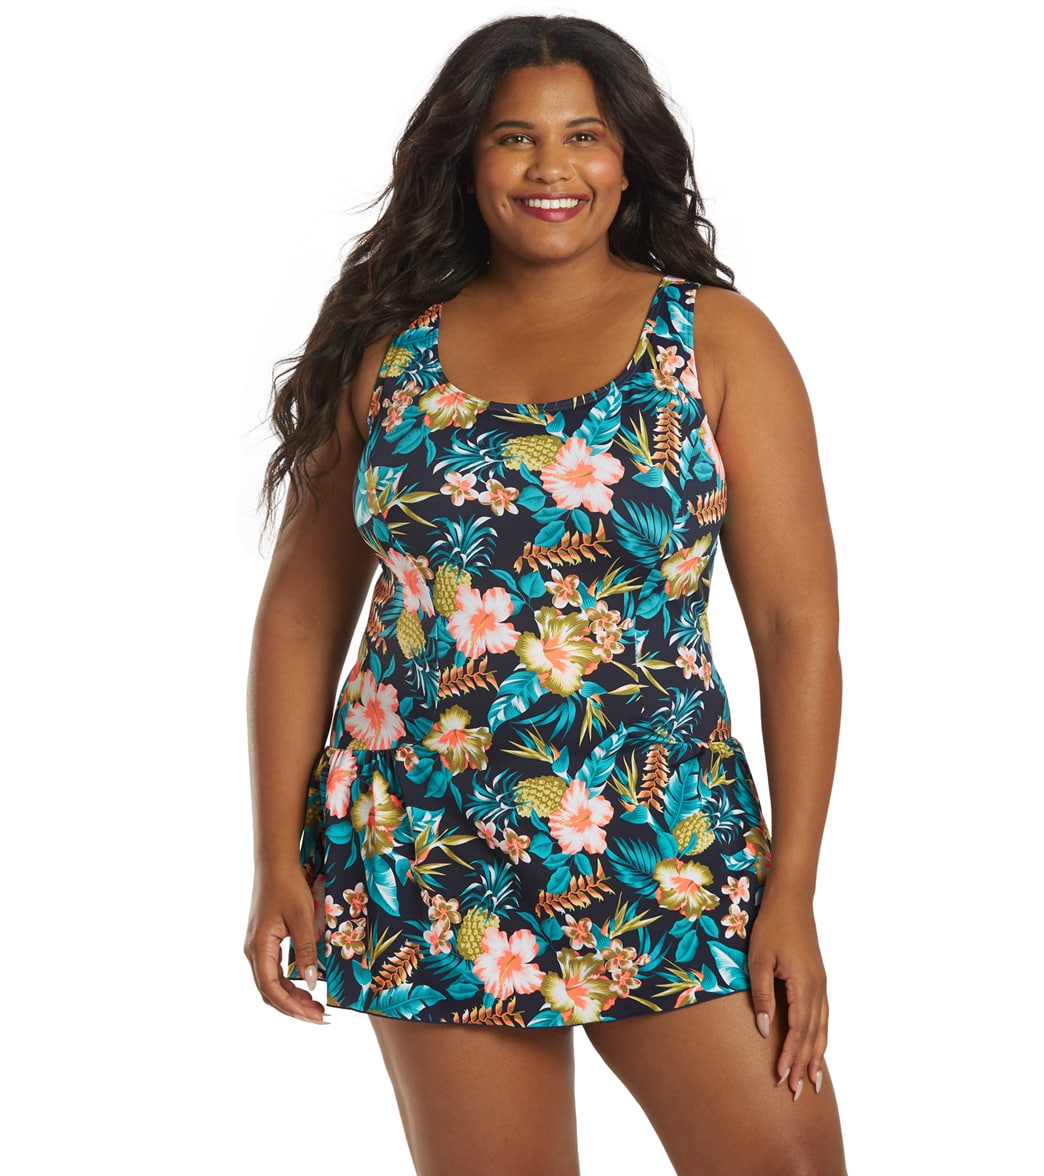 plus size swim suit, plus size swim suit Suppliers and